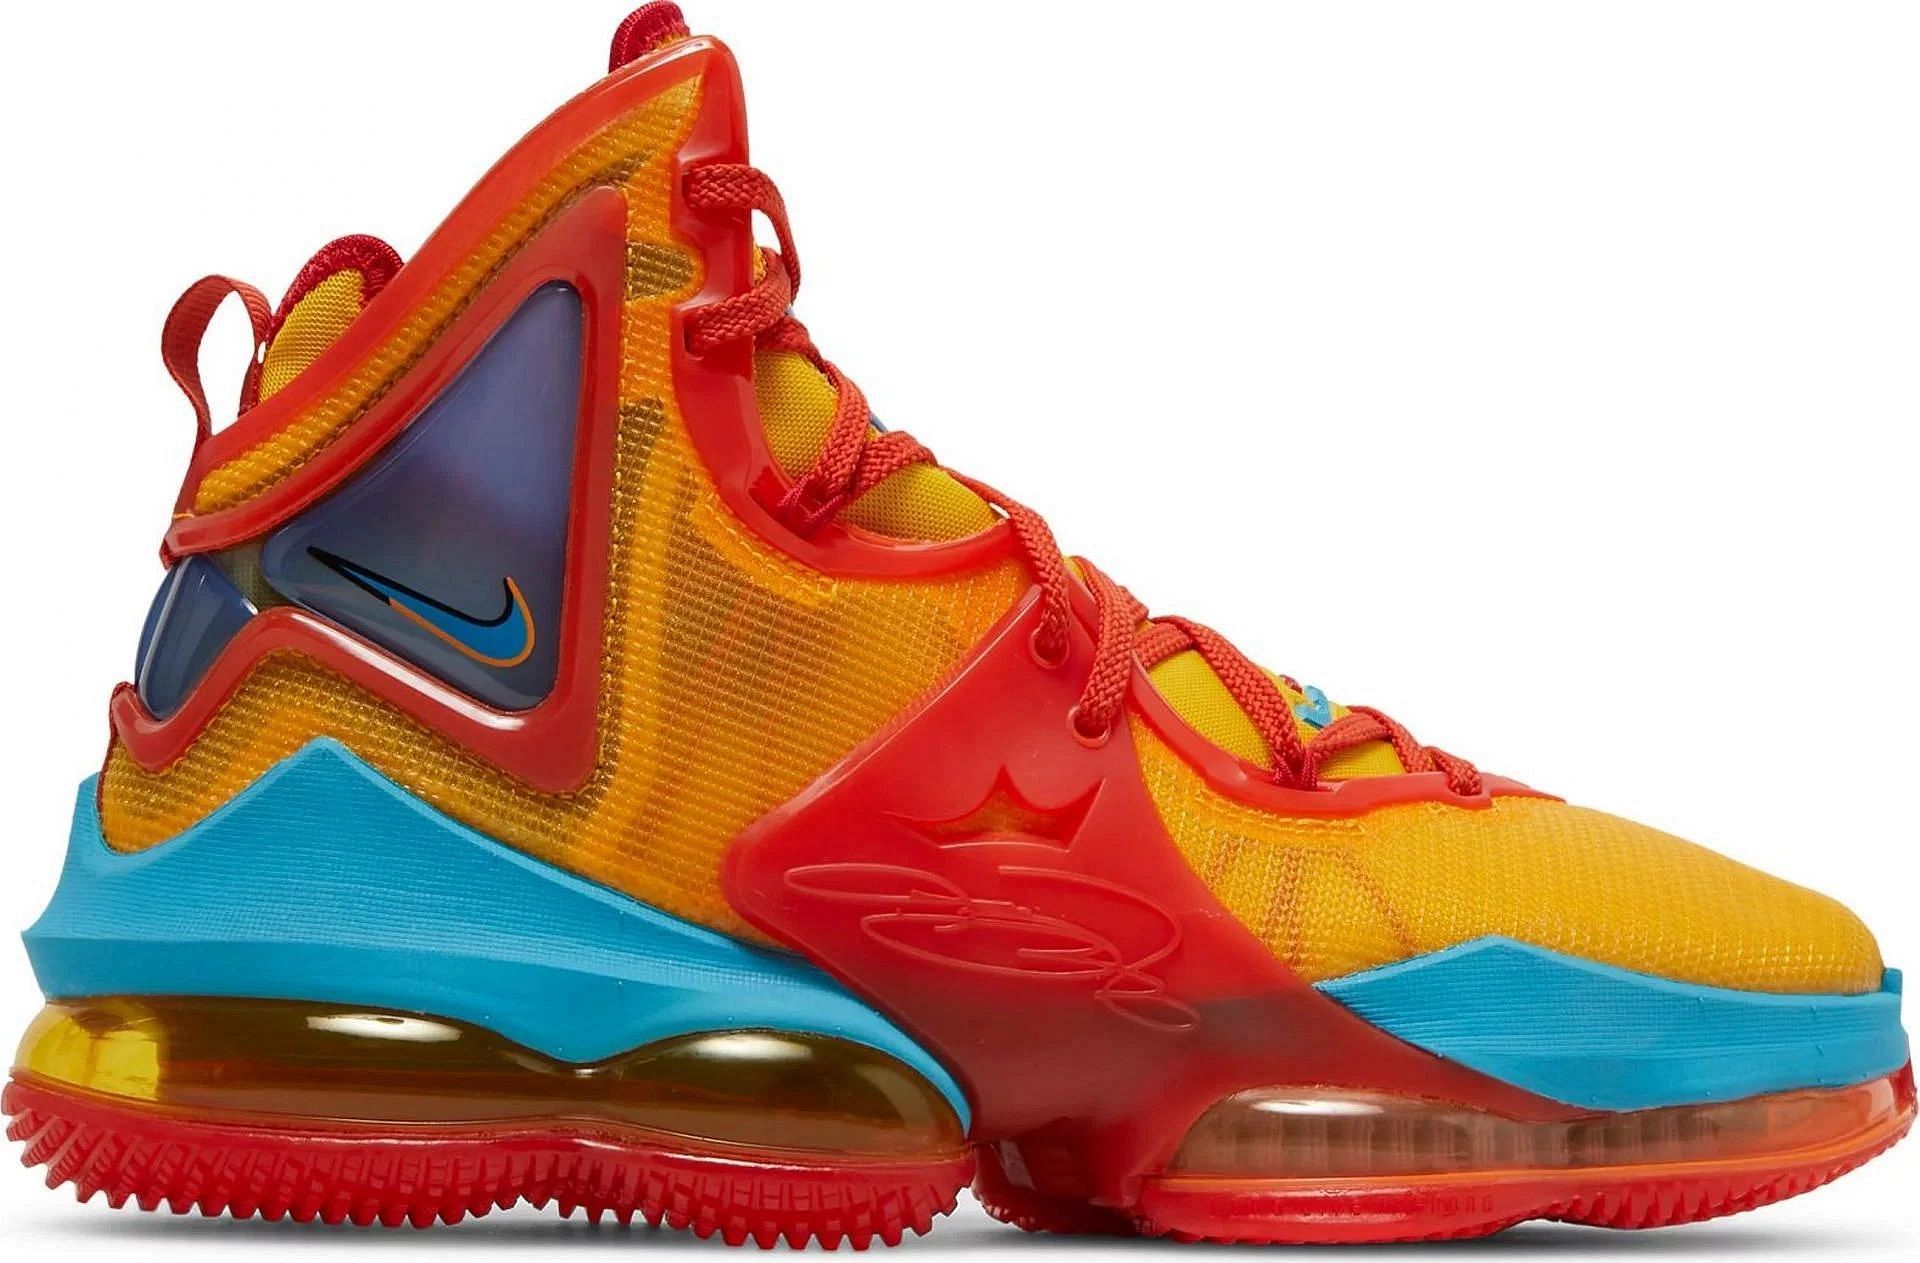 LeBron James' shoes: 5 best sneaker collabs from LBJ's shoe line